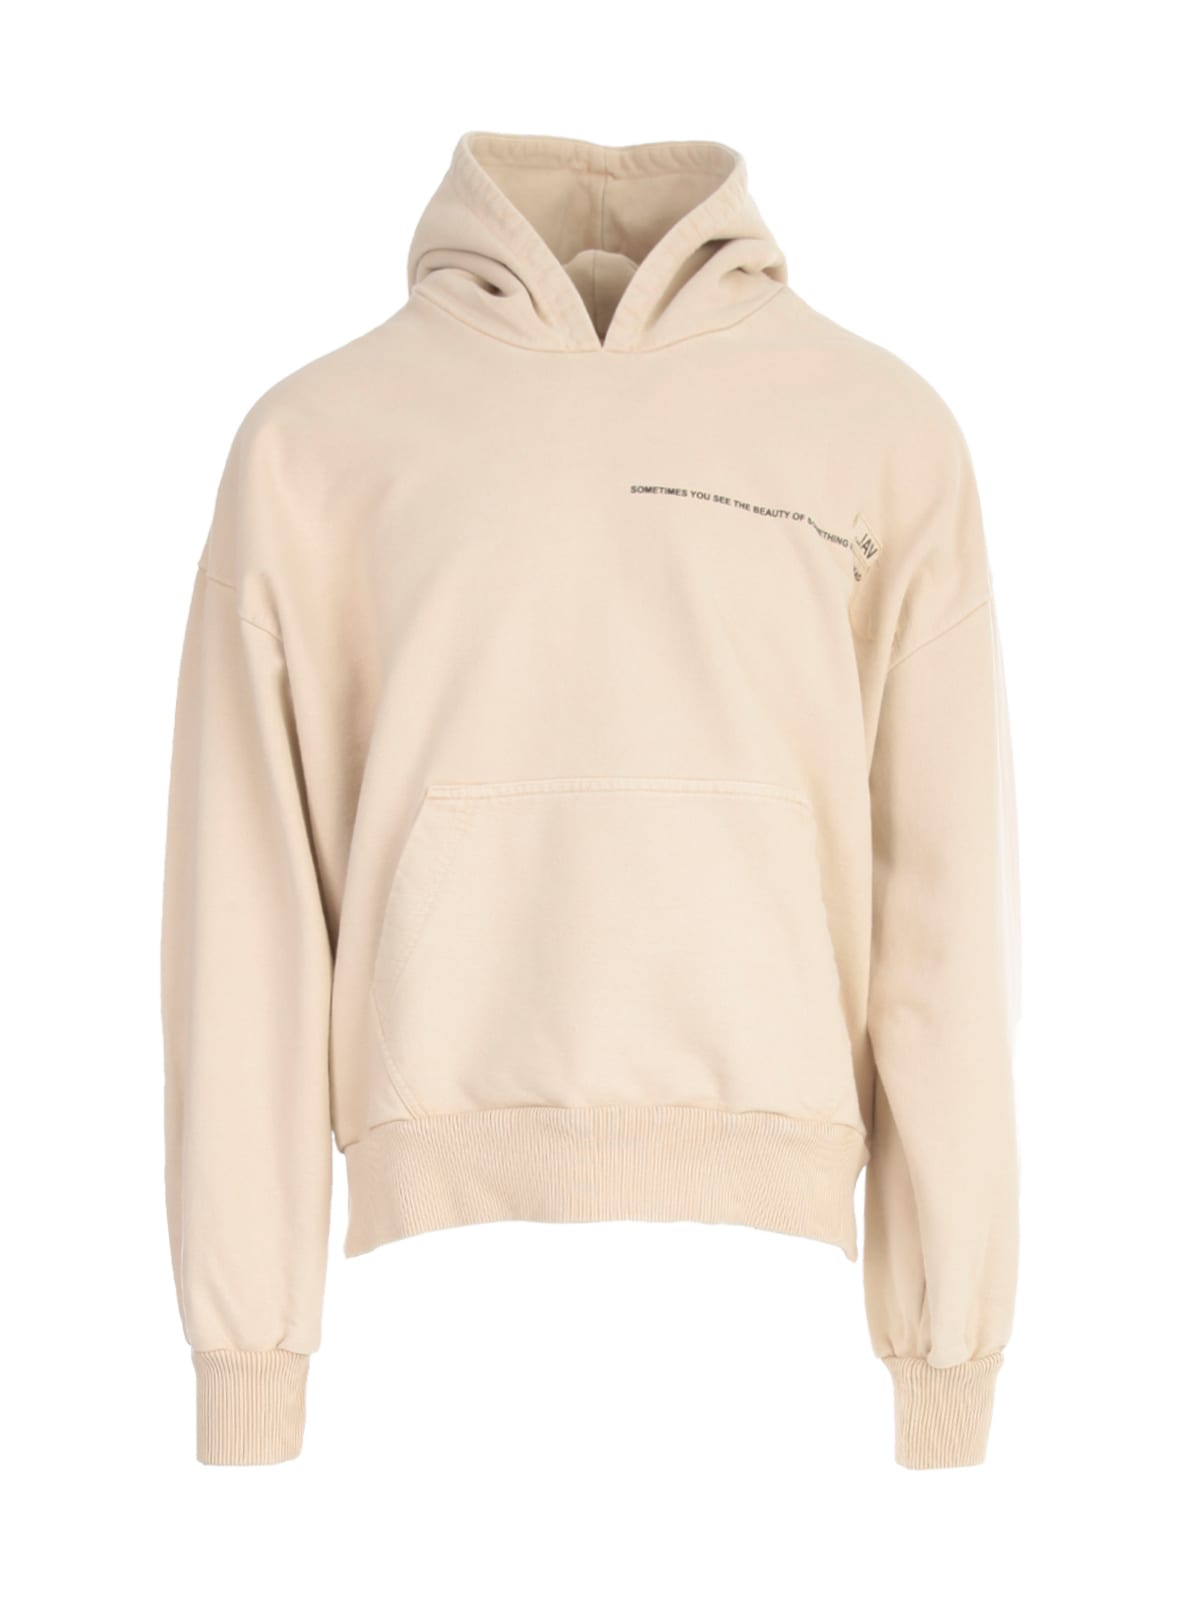 VAL KRISTOPHER BASIC LOGO HOODIE,SS21VKSS210028 WASOAT WASHED OATMEAL